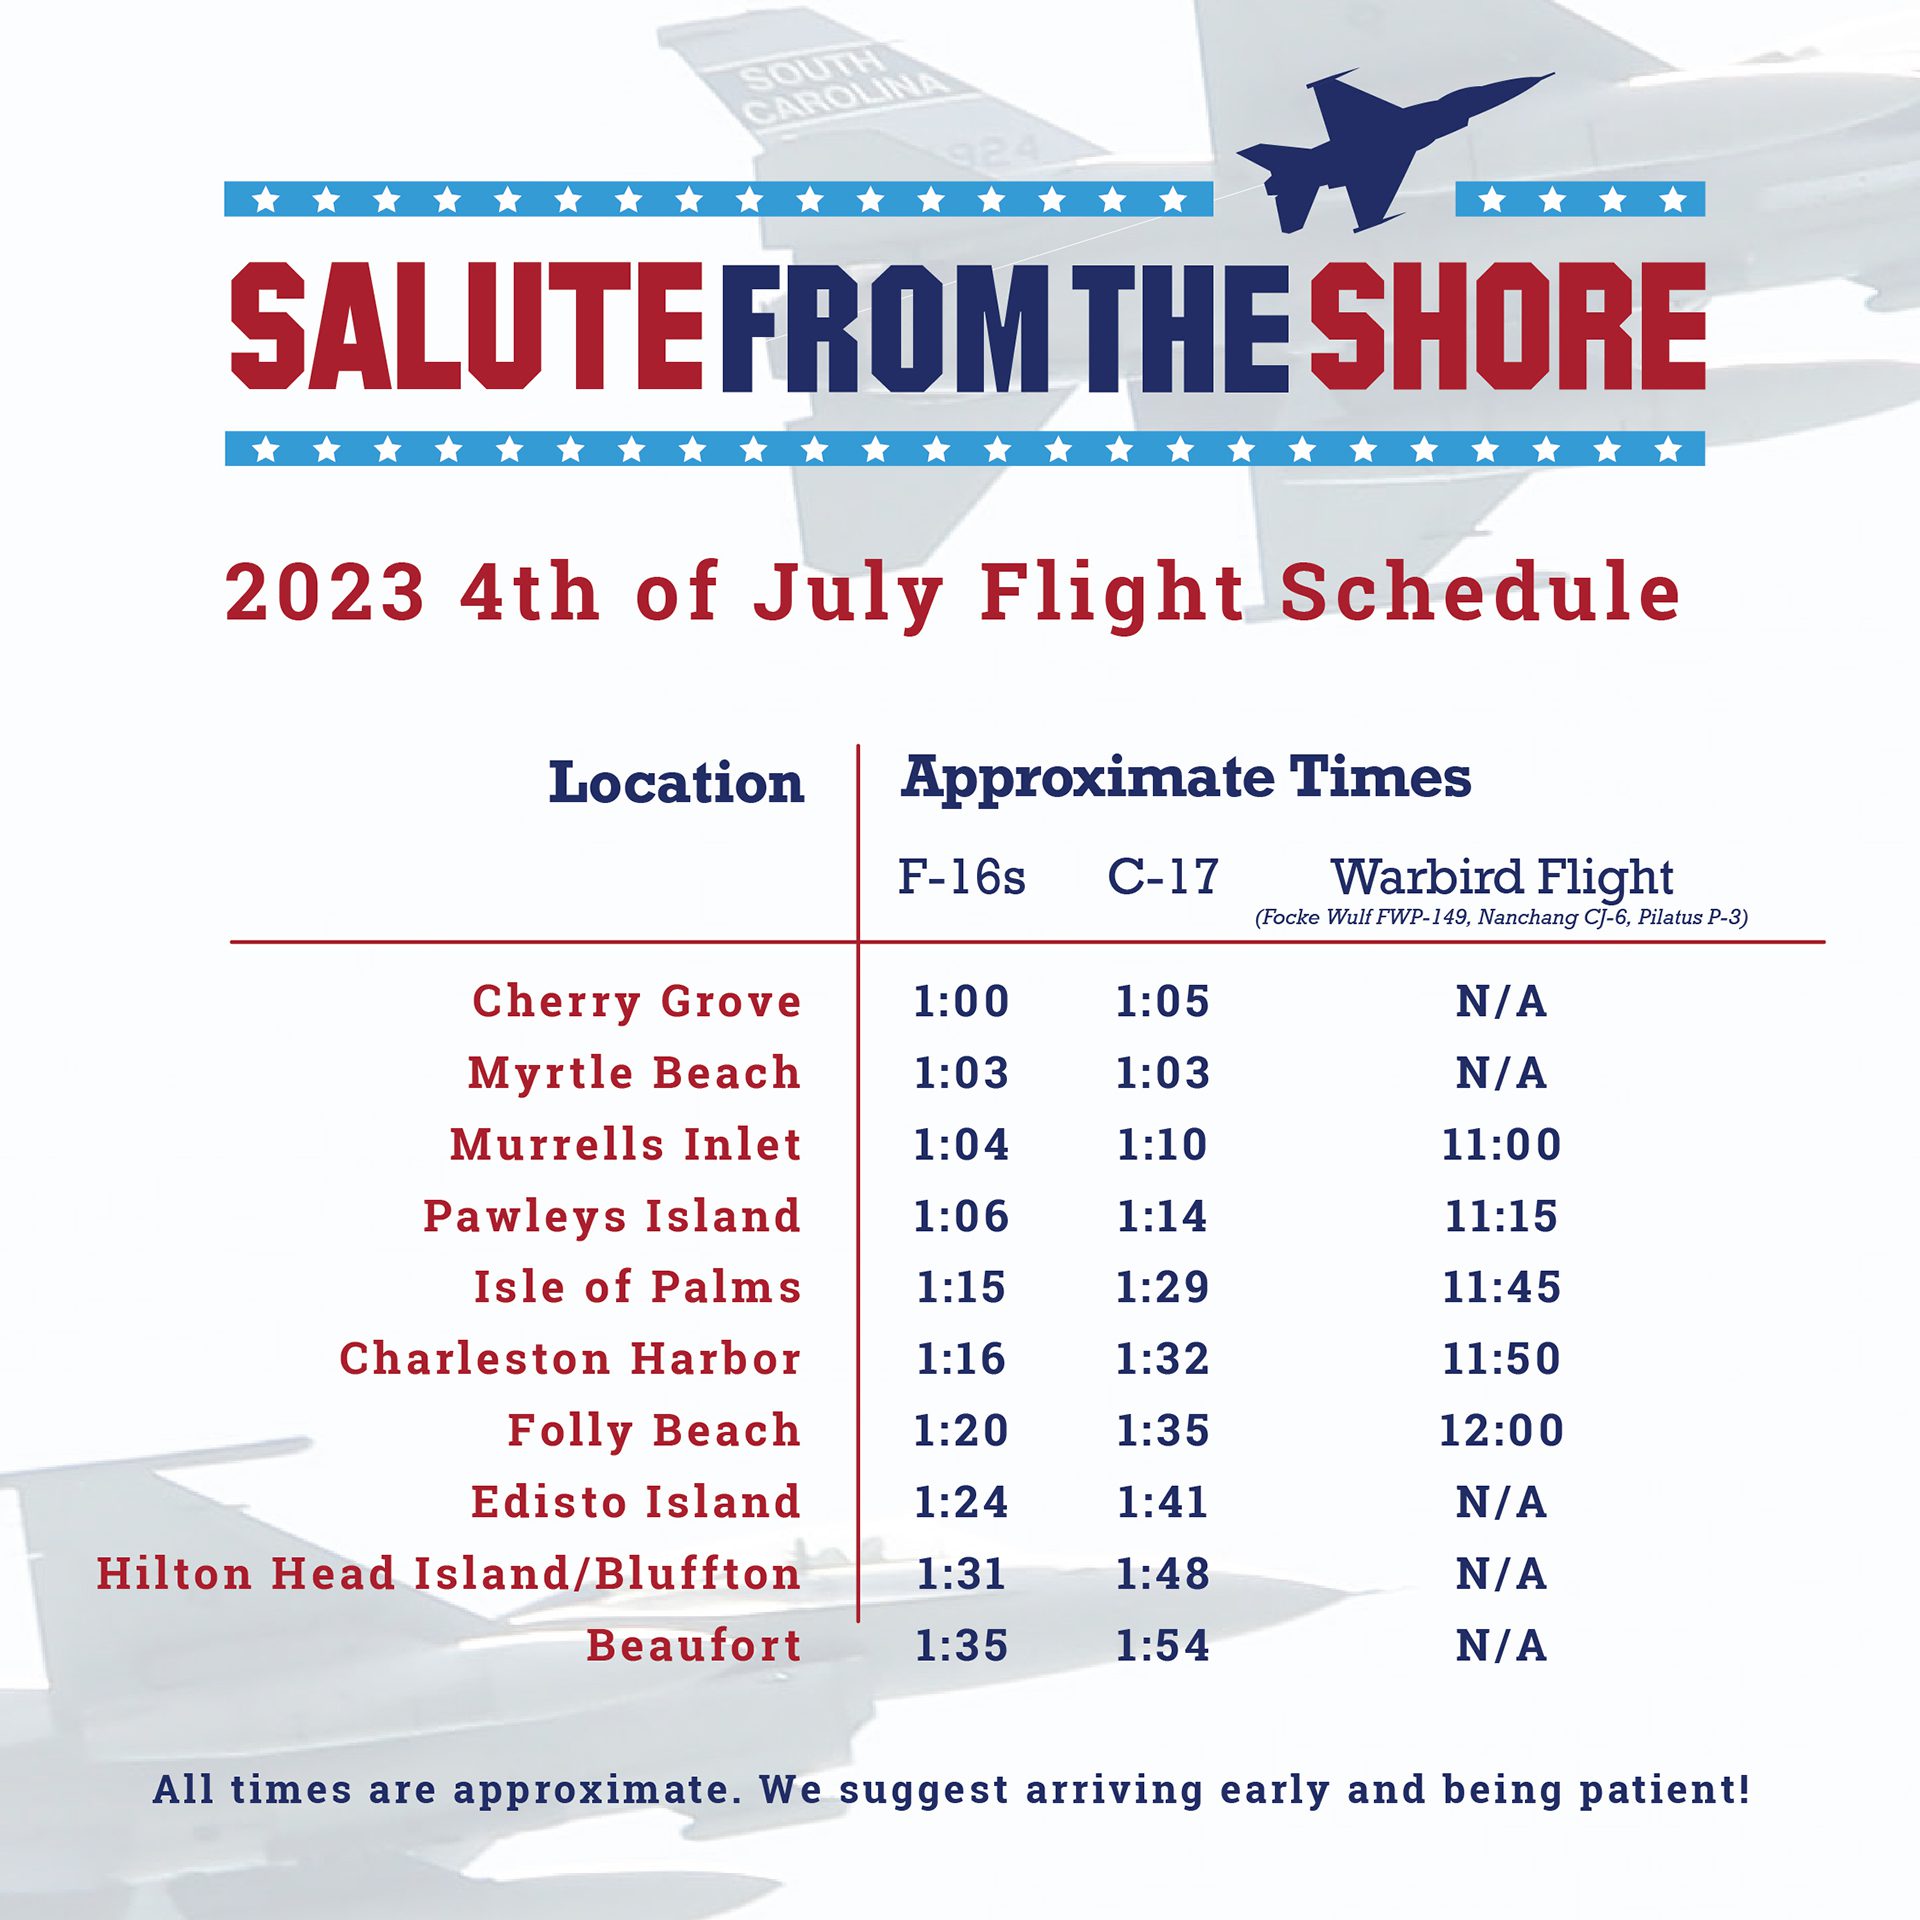 20230627 SFTS Flight Schedule Salute From the Shore